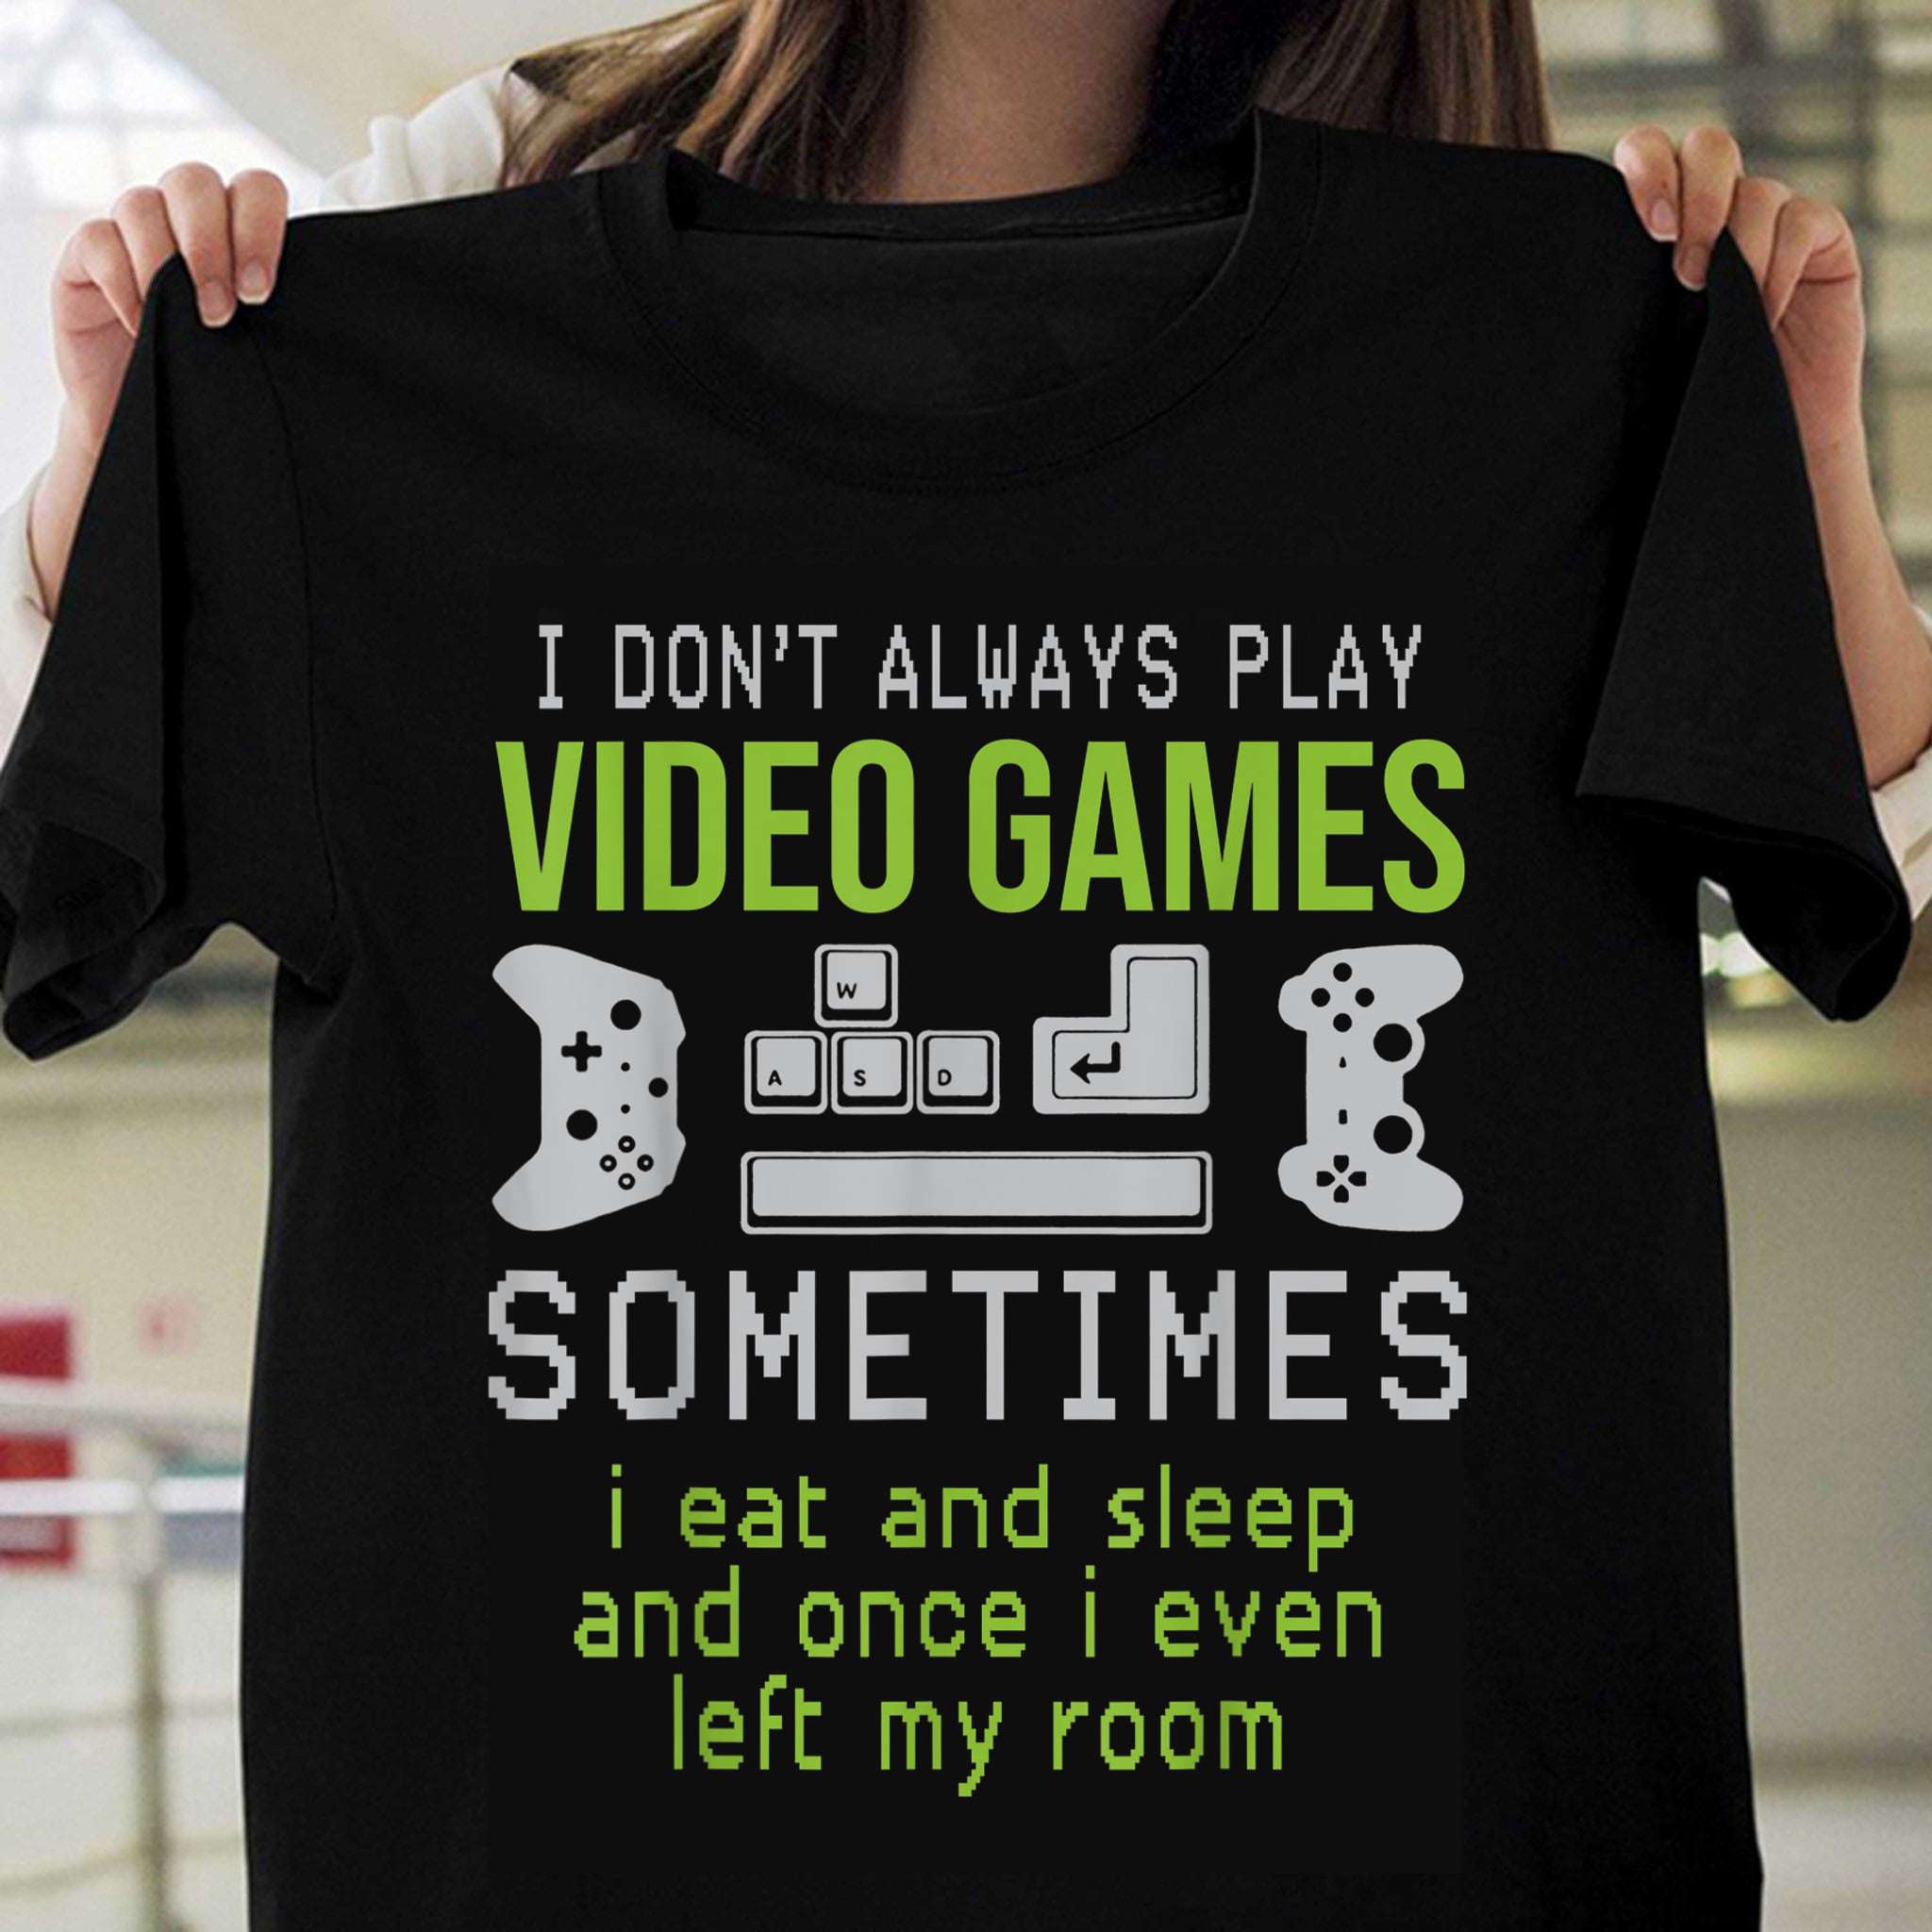 I don't always play video games, sometimes I eat and sleep and once I even left my room